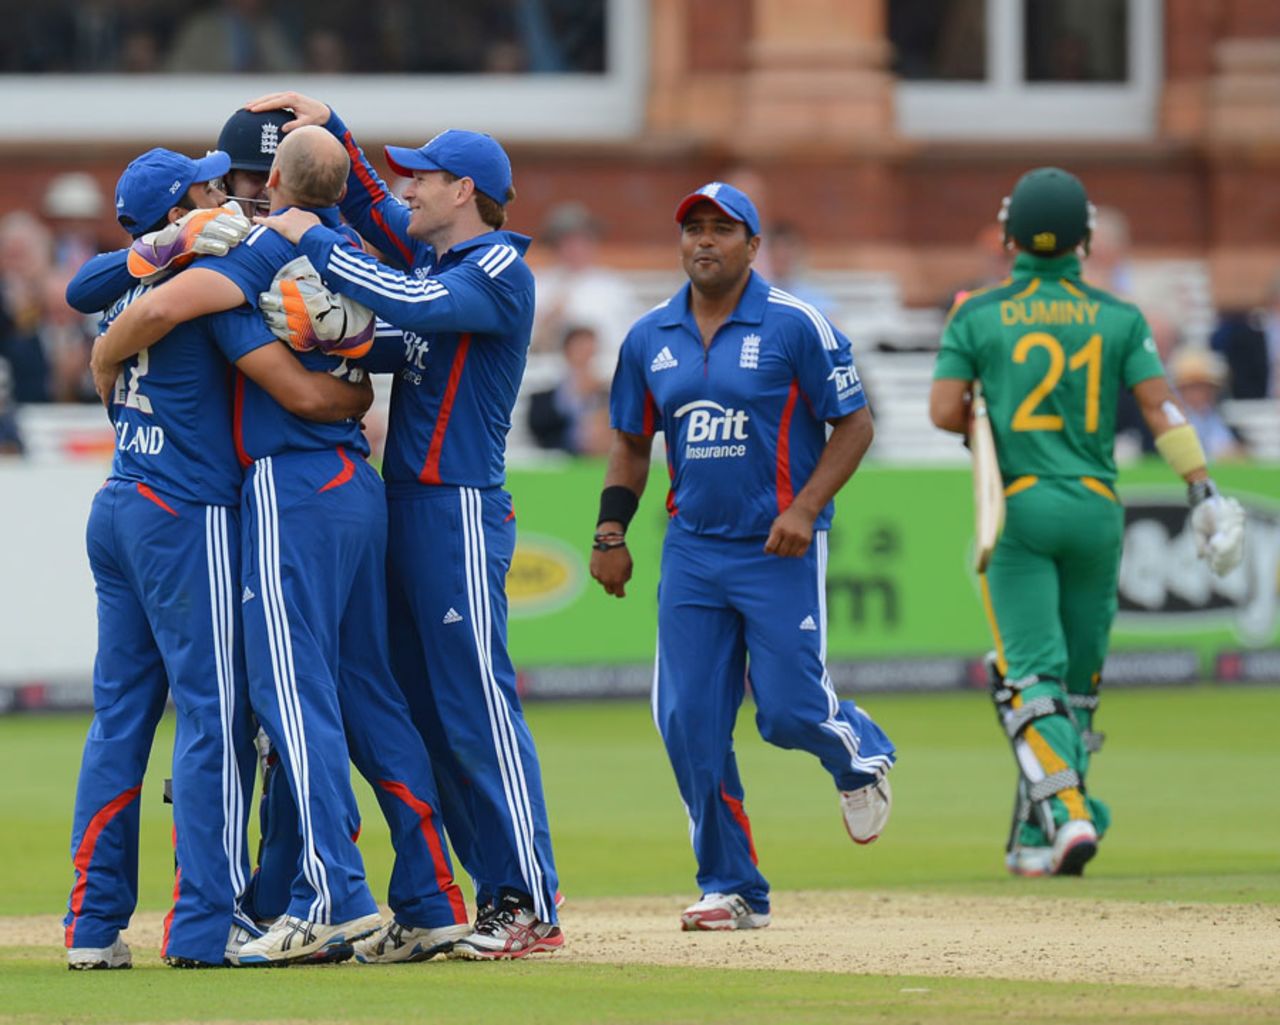 Craig Kieswetter is congratulated after his stumping of JP Duminy, England v South Africa, 4th ODI, Lord's, September 2, 2012